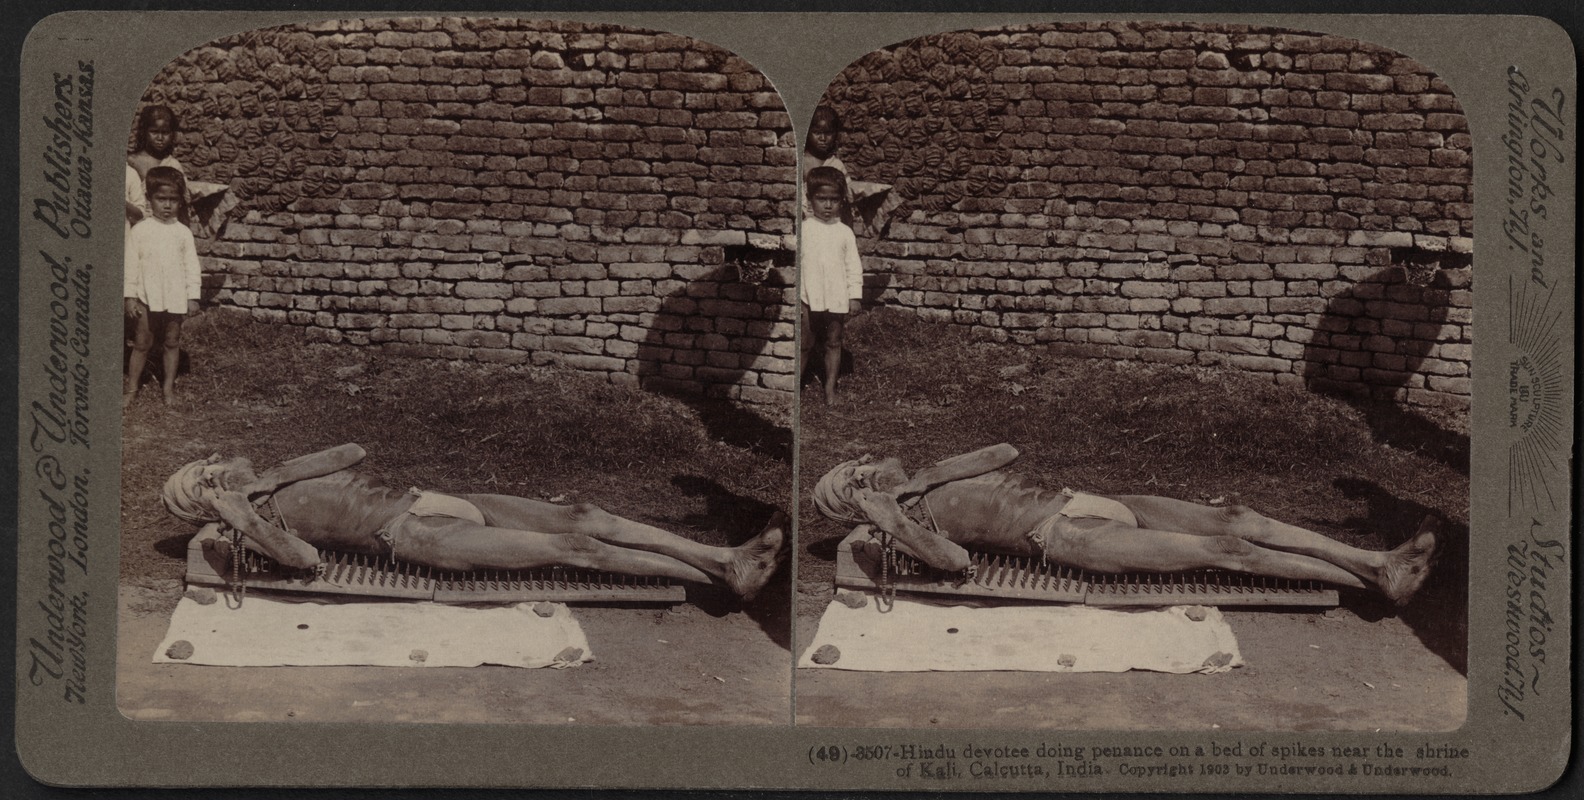 Hindu devotee doing penance on a bed of spikes, Calcutta, India